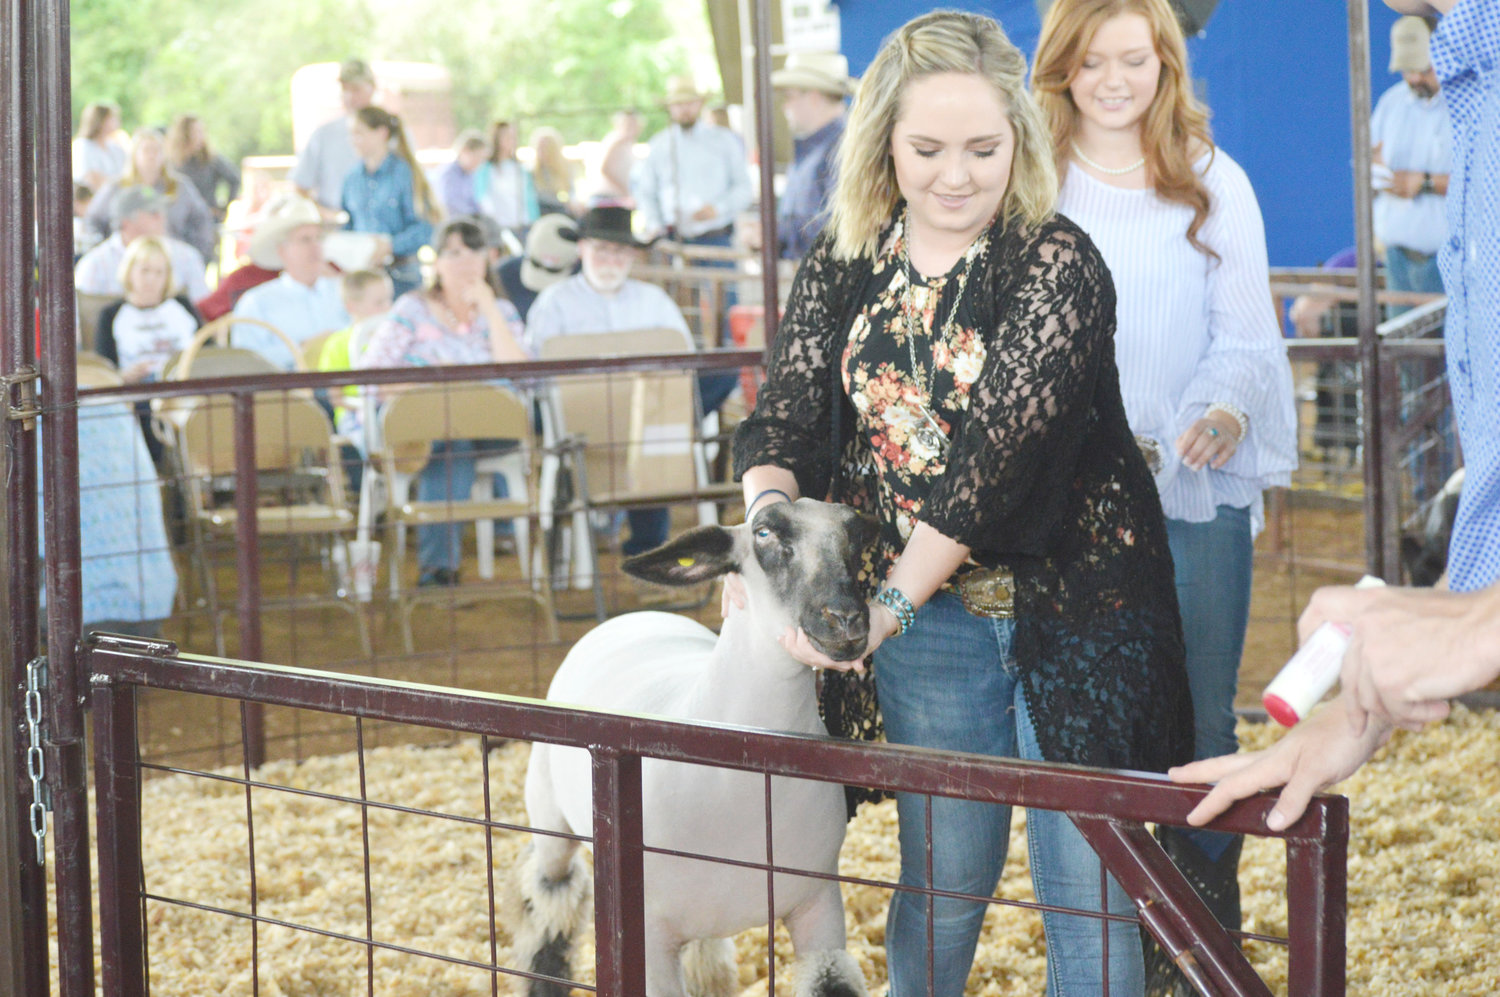 Gracie Beech, Yantis FFA, had the Grand Champion Lamb which sold for $2,250. (Monitor photos by Larry Tucker)